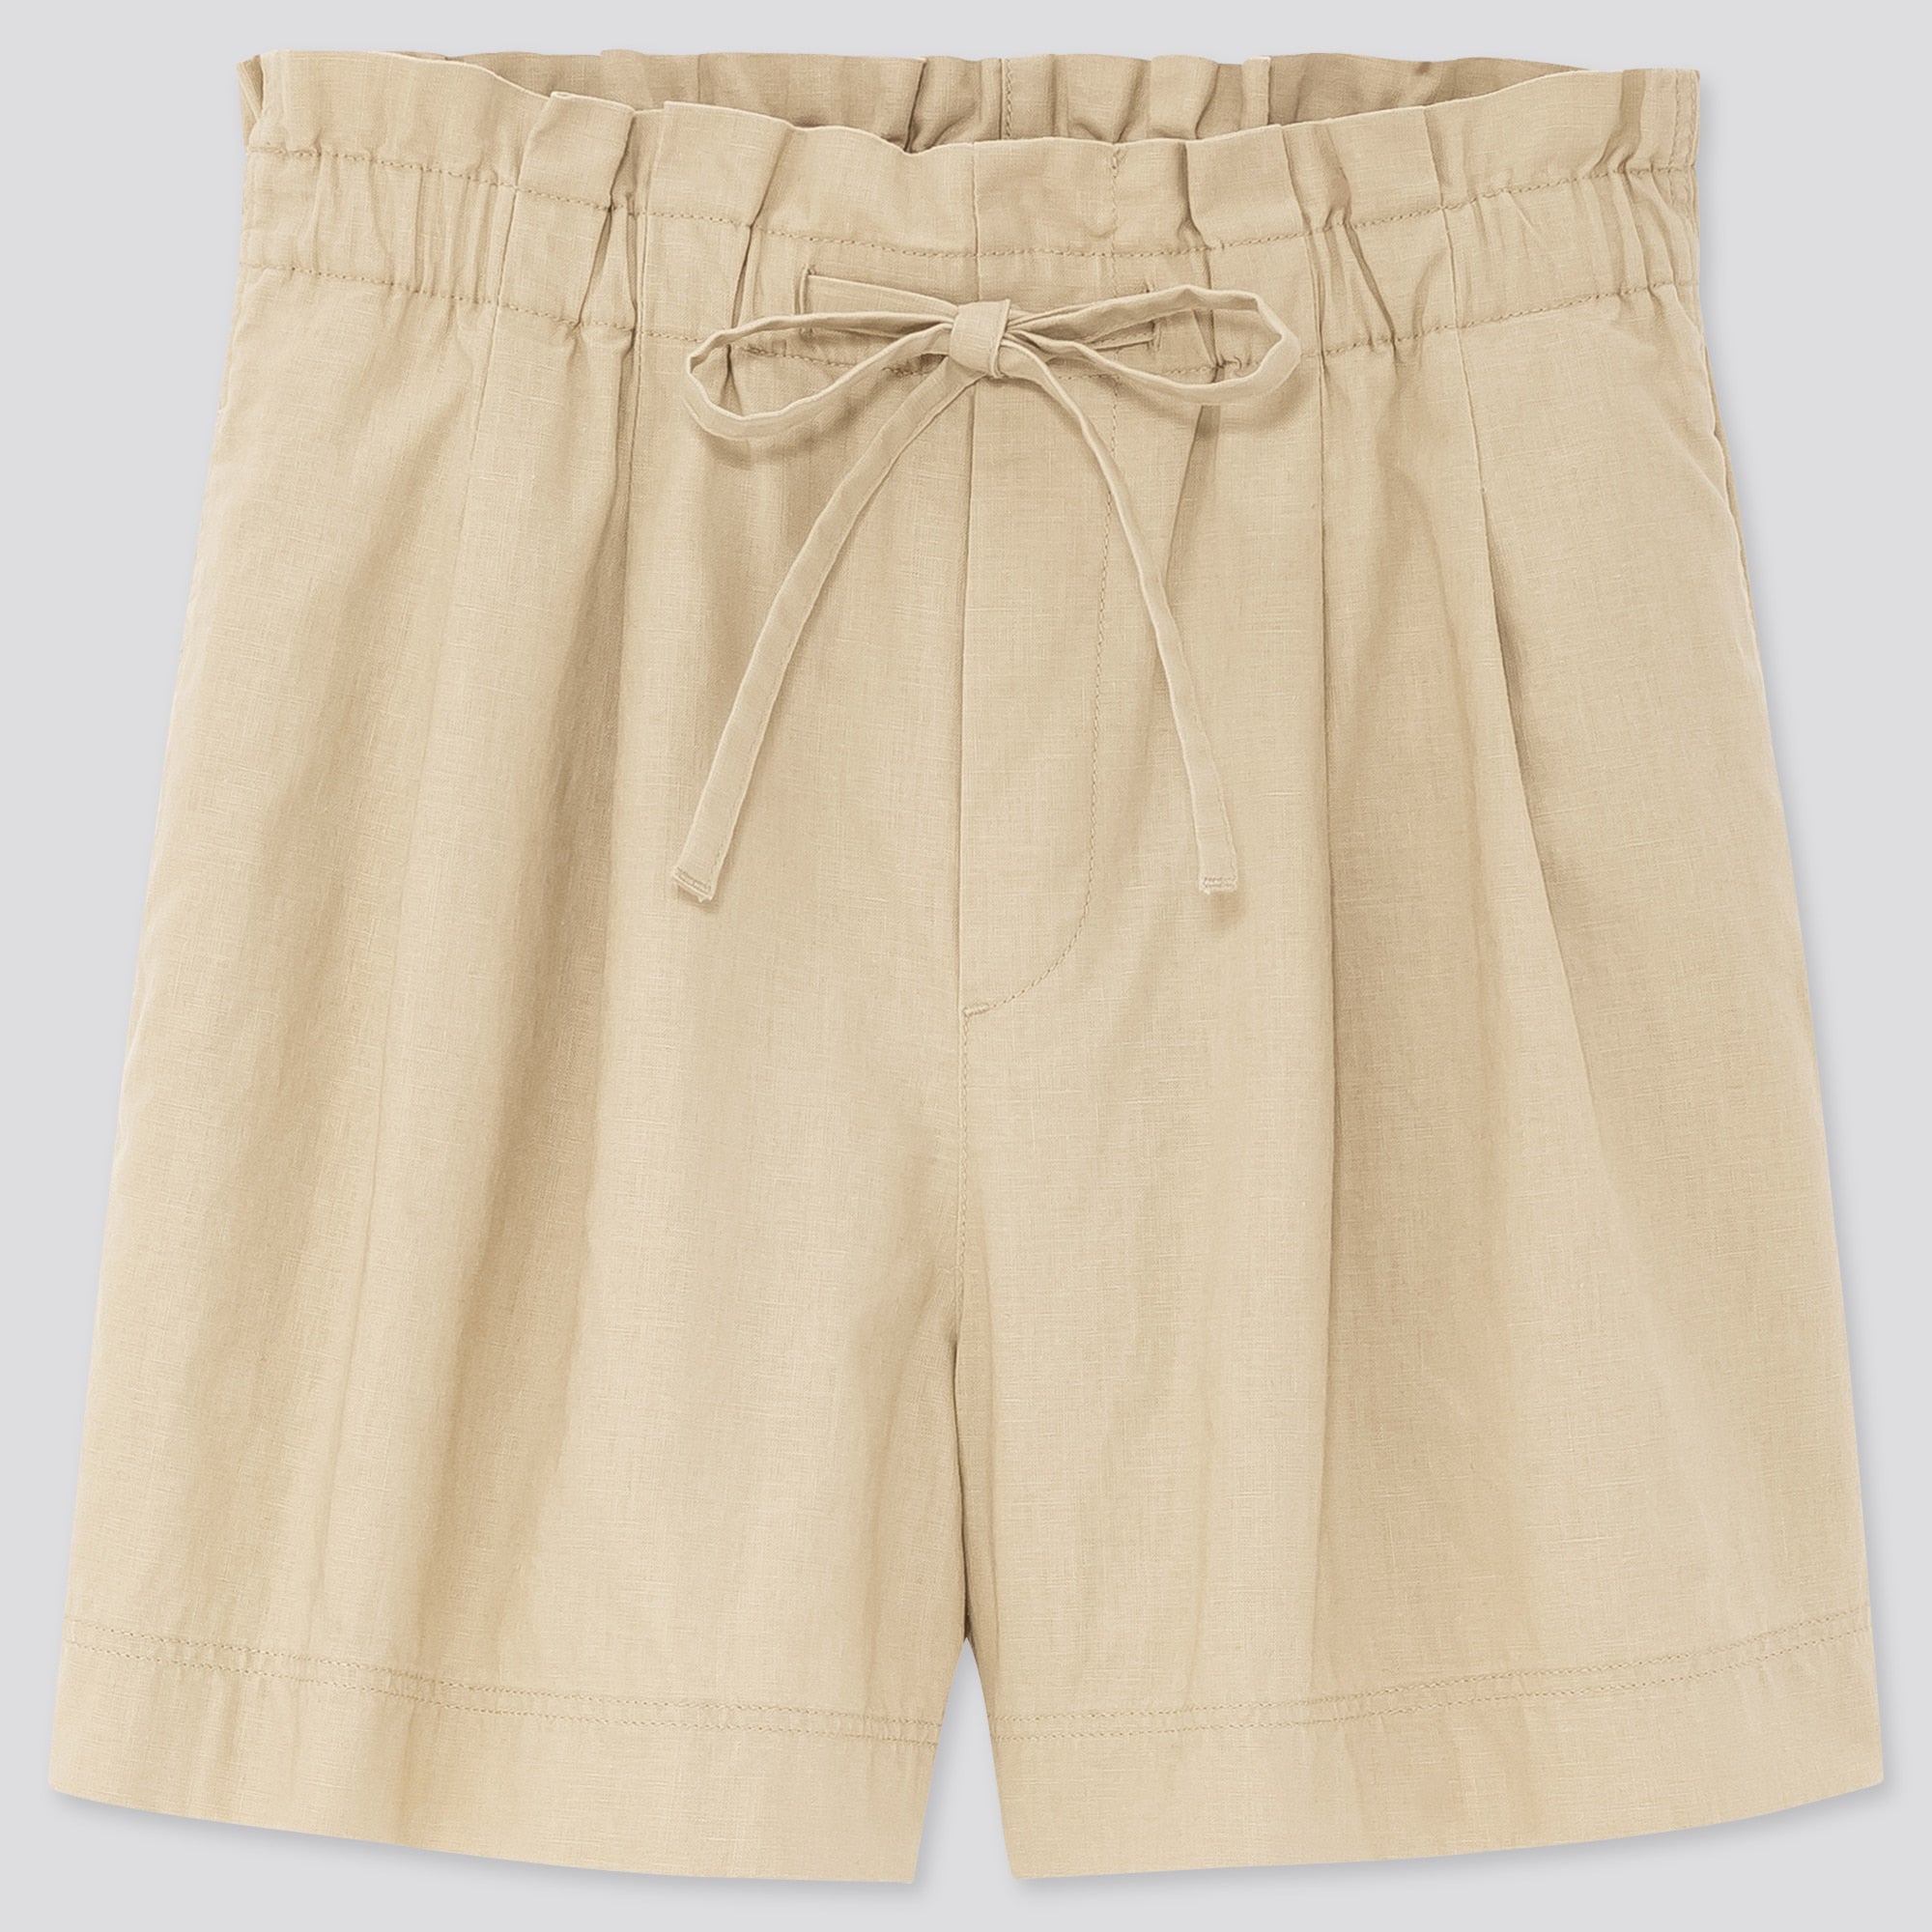 Uniqlo + Linen Cotton Blend Relaxed Fit Shorts